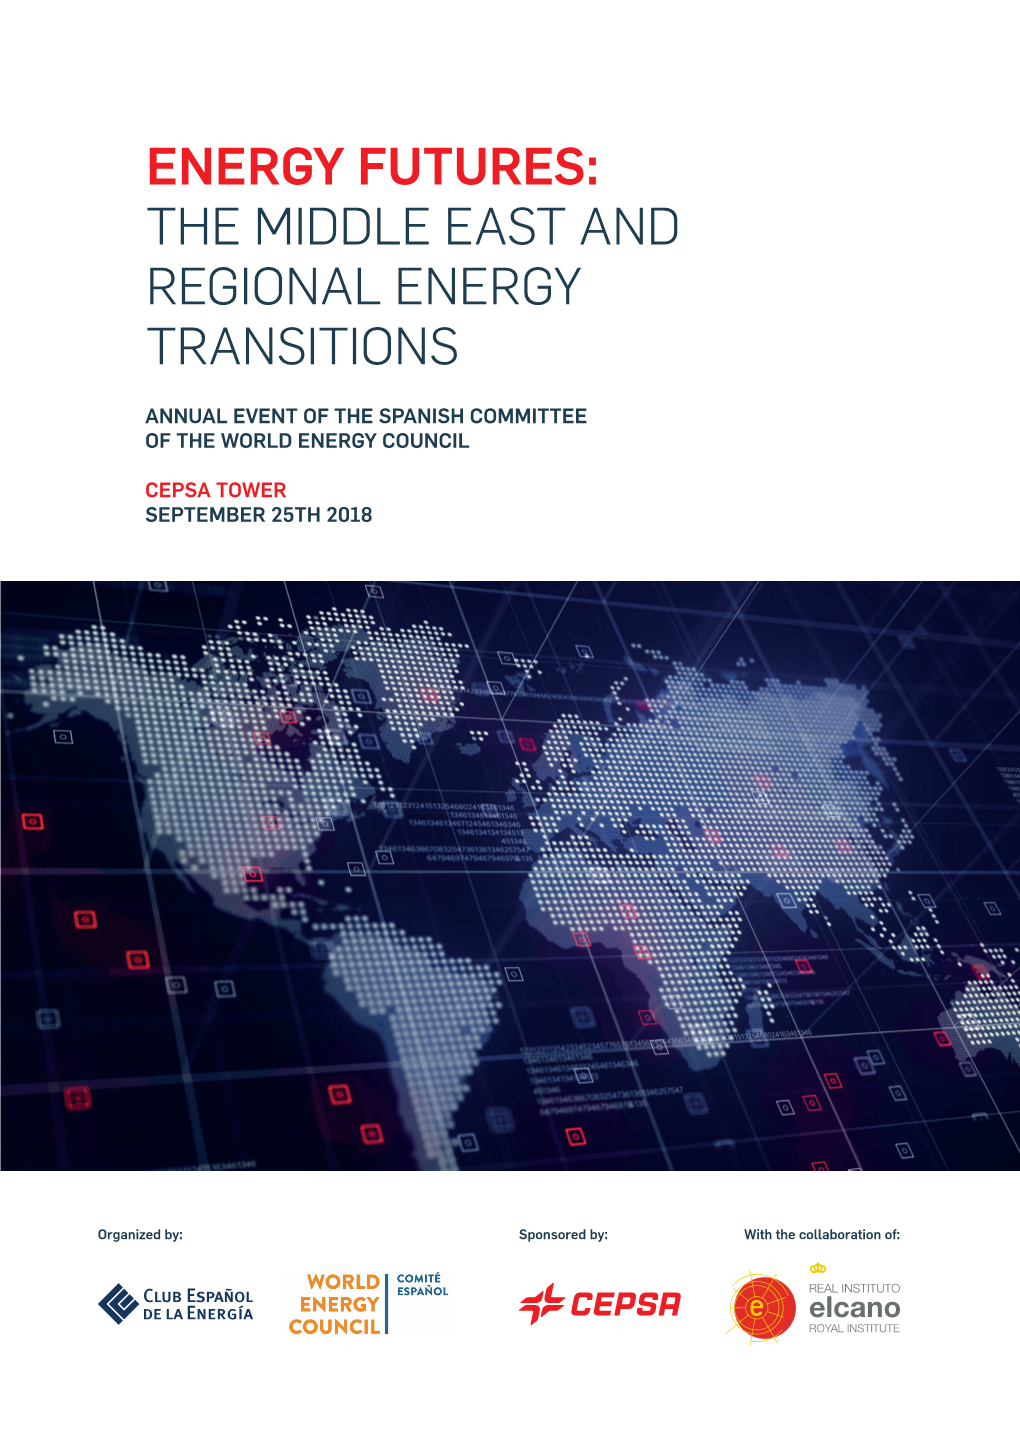 The Middle East and Regional Energy Transitions